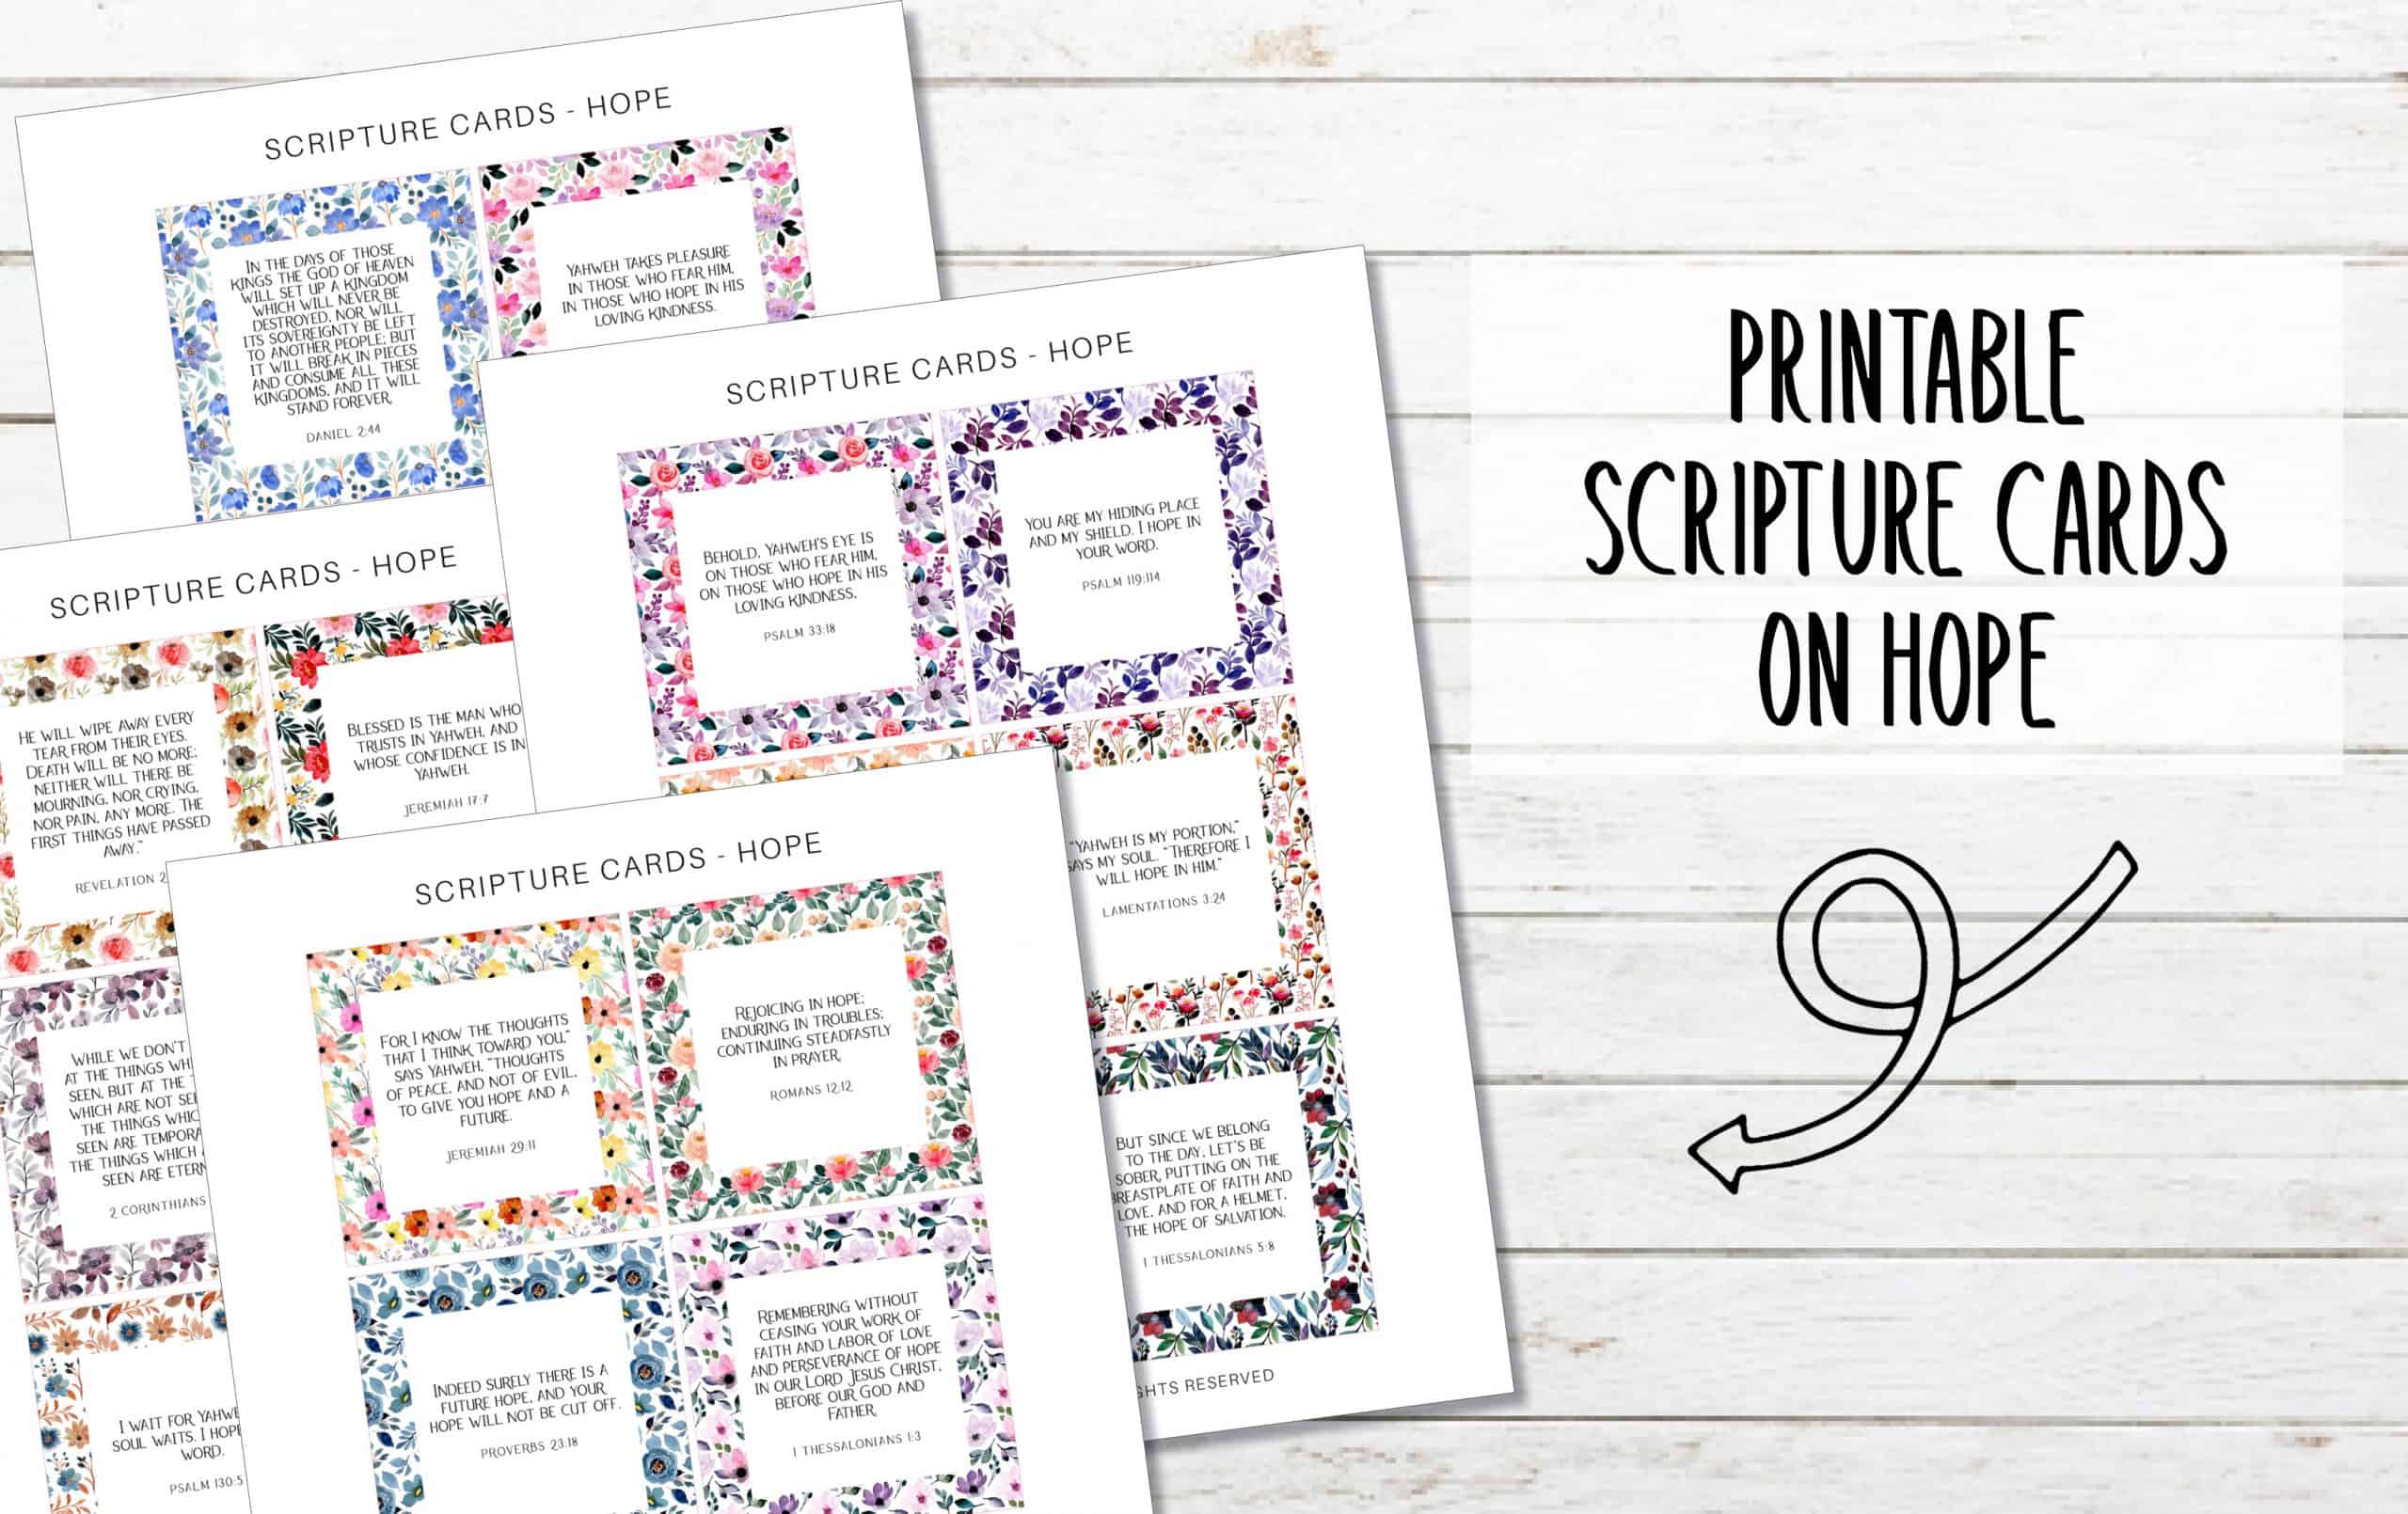 main image of scripture cards with text printable scripture cards on hope